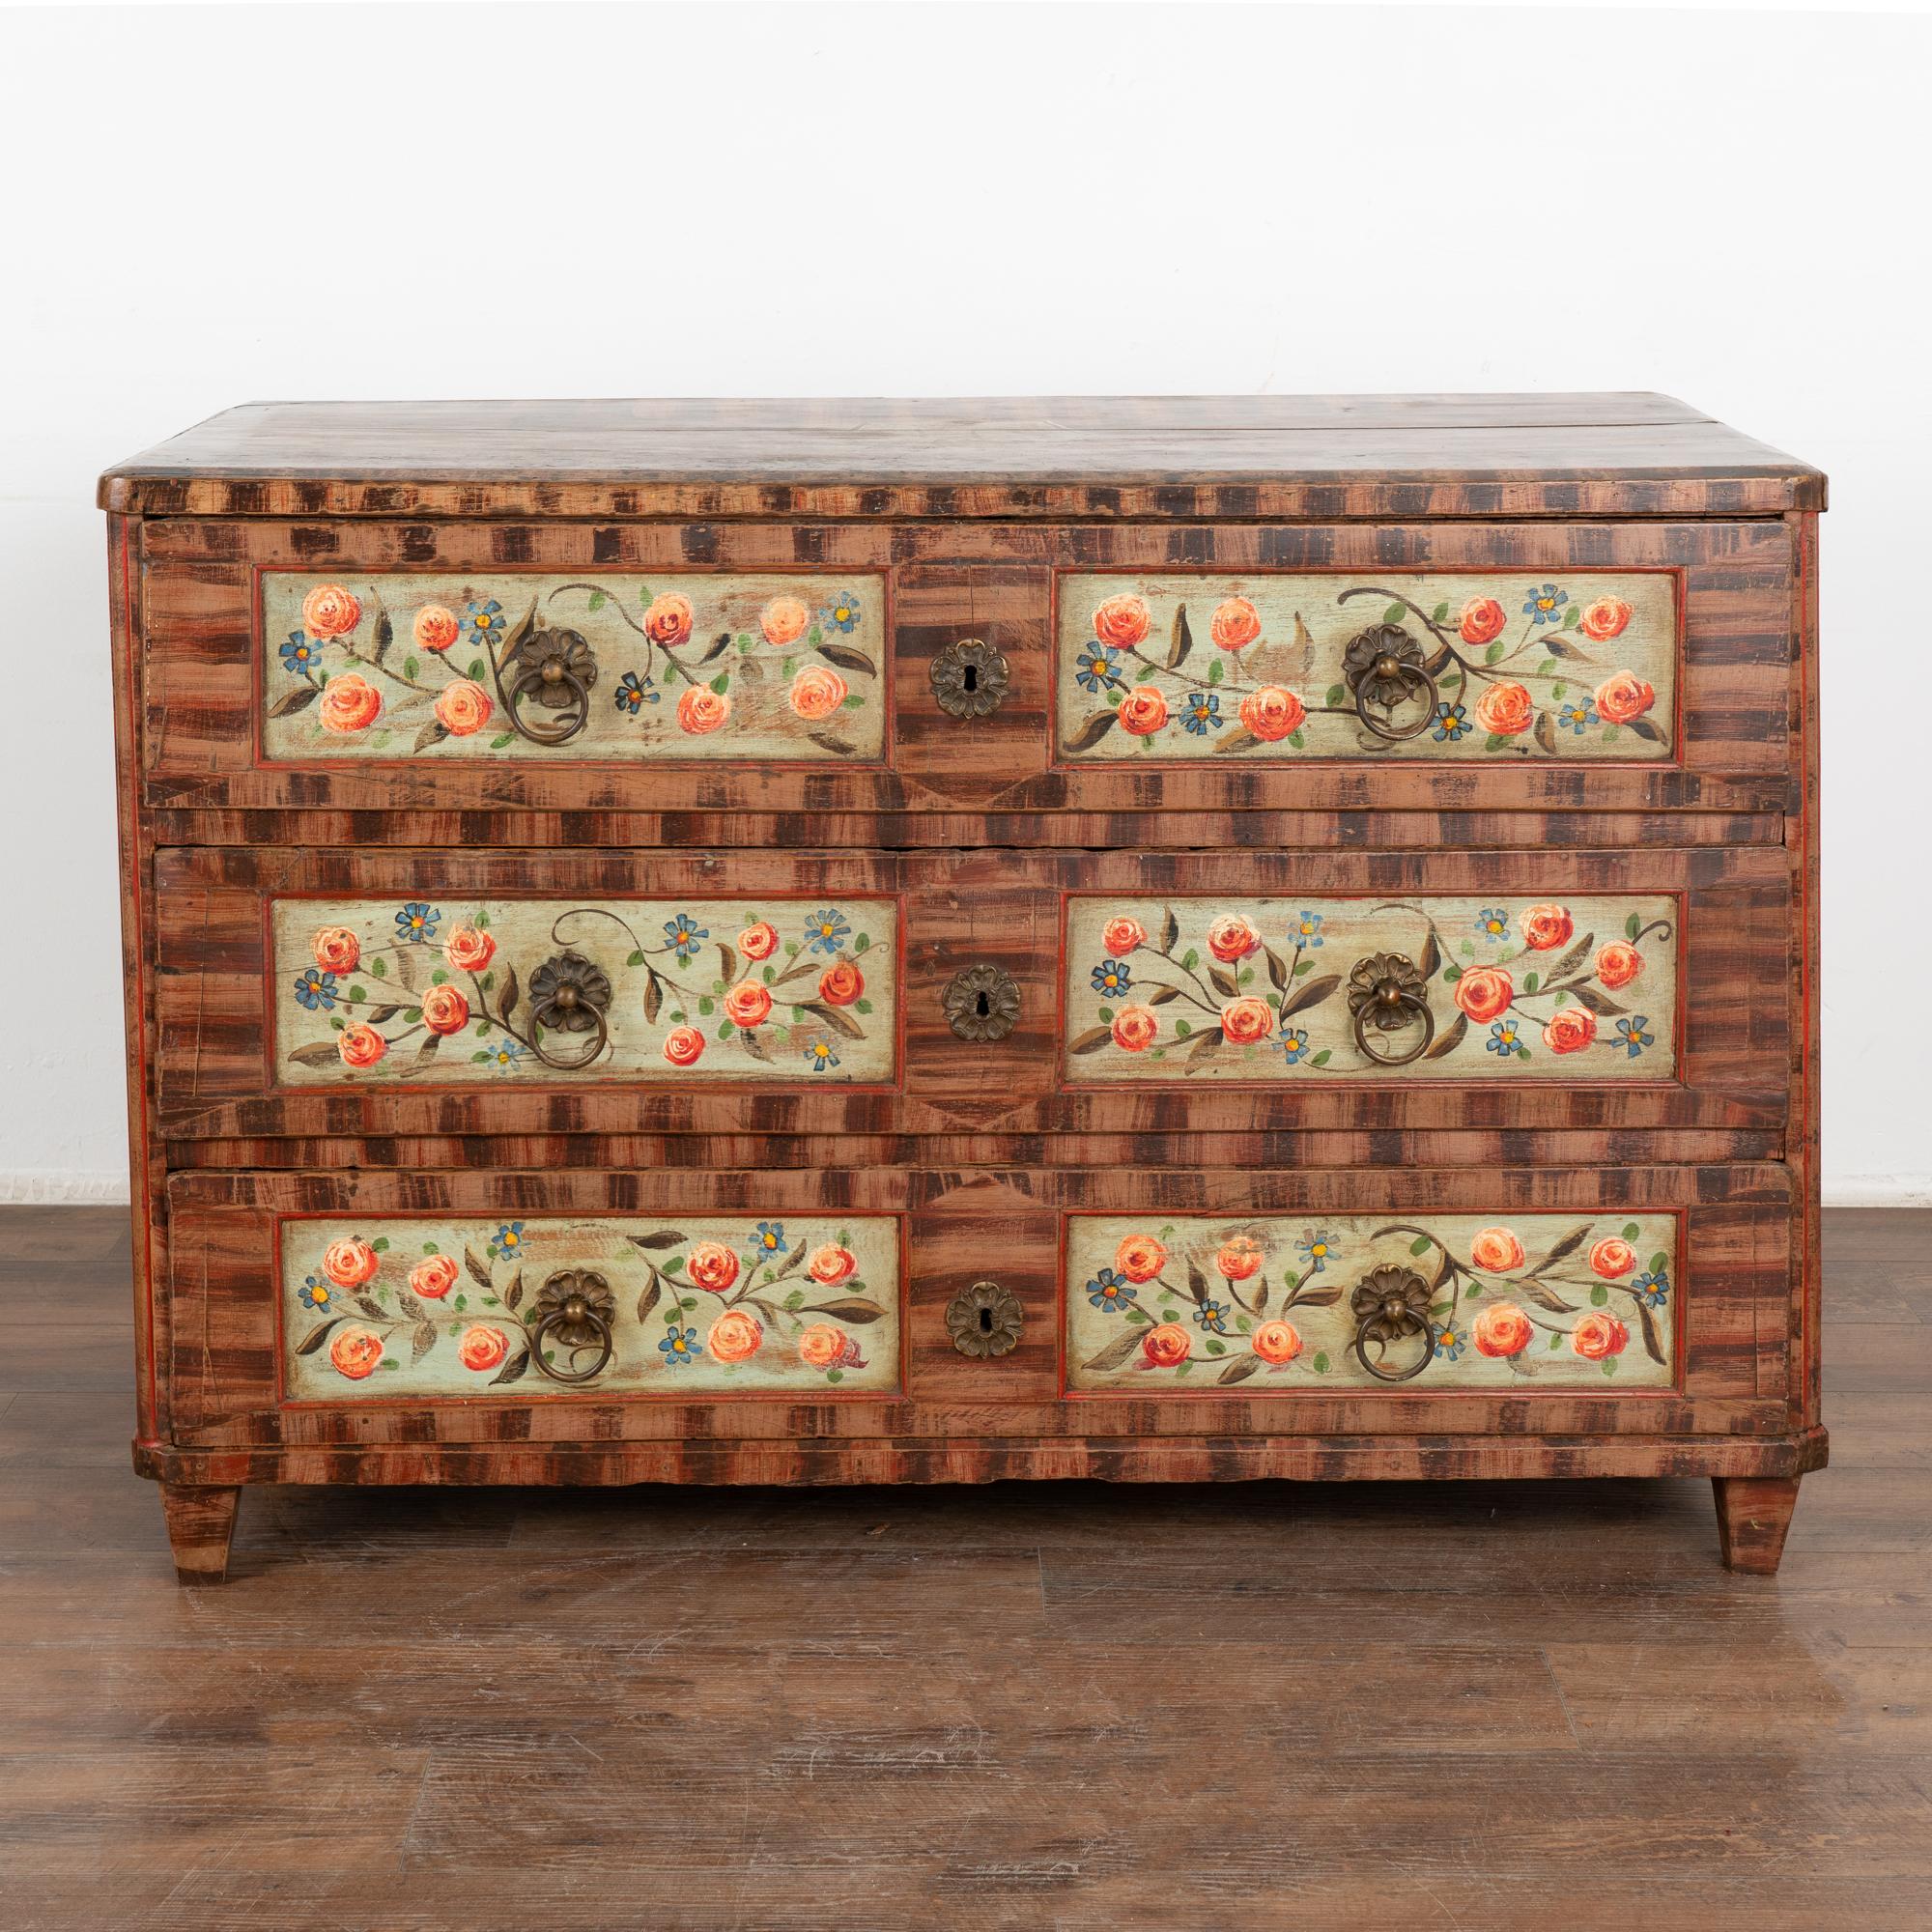 Hungarian Original Painted Chest of 3 Drawers Blanket Chest With Flowers, Circa 1860-80